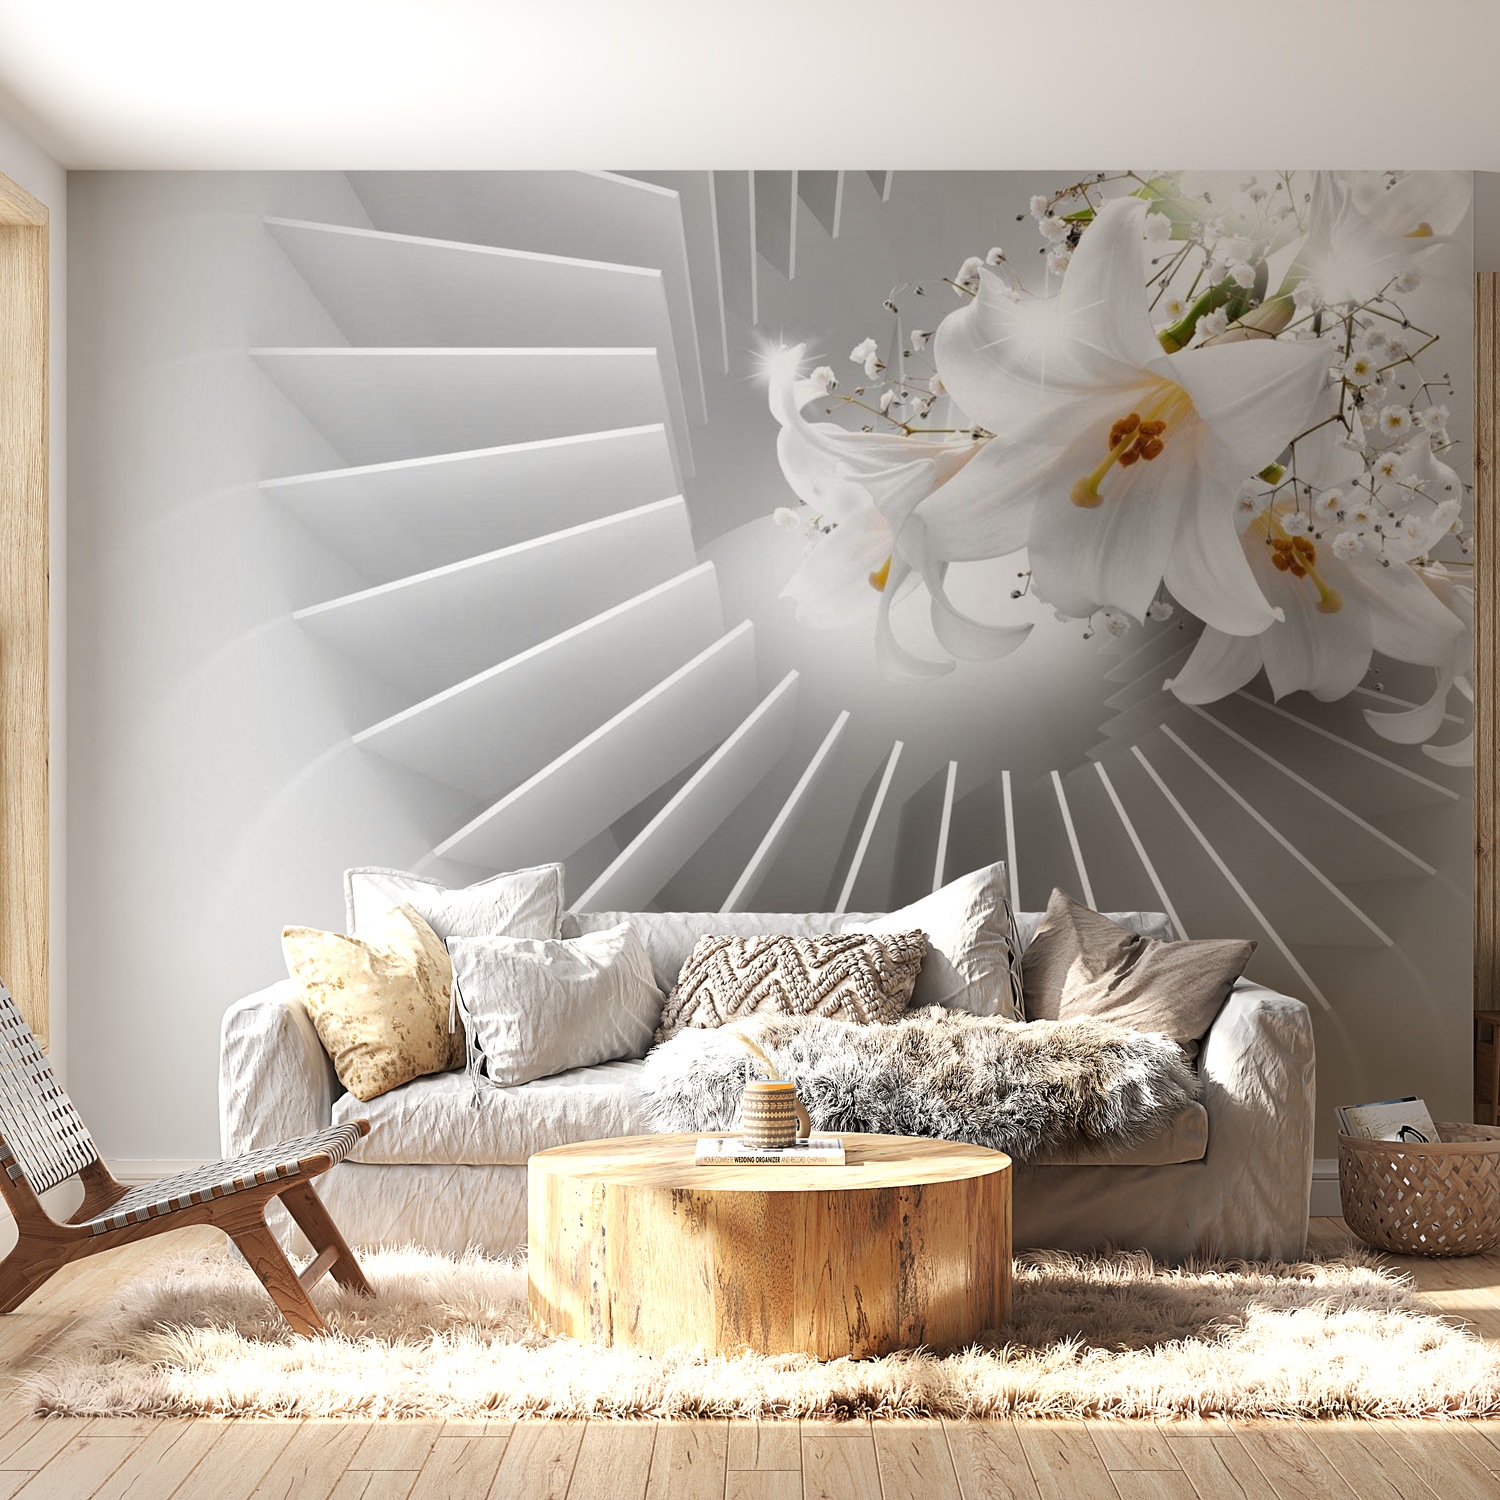 3D Illusion Wallpaper Wall Mural - Domino Effect 39"Wx27"H